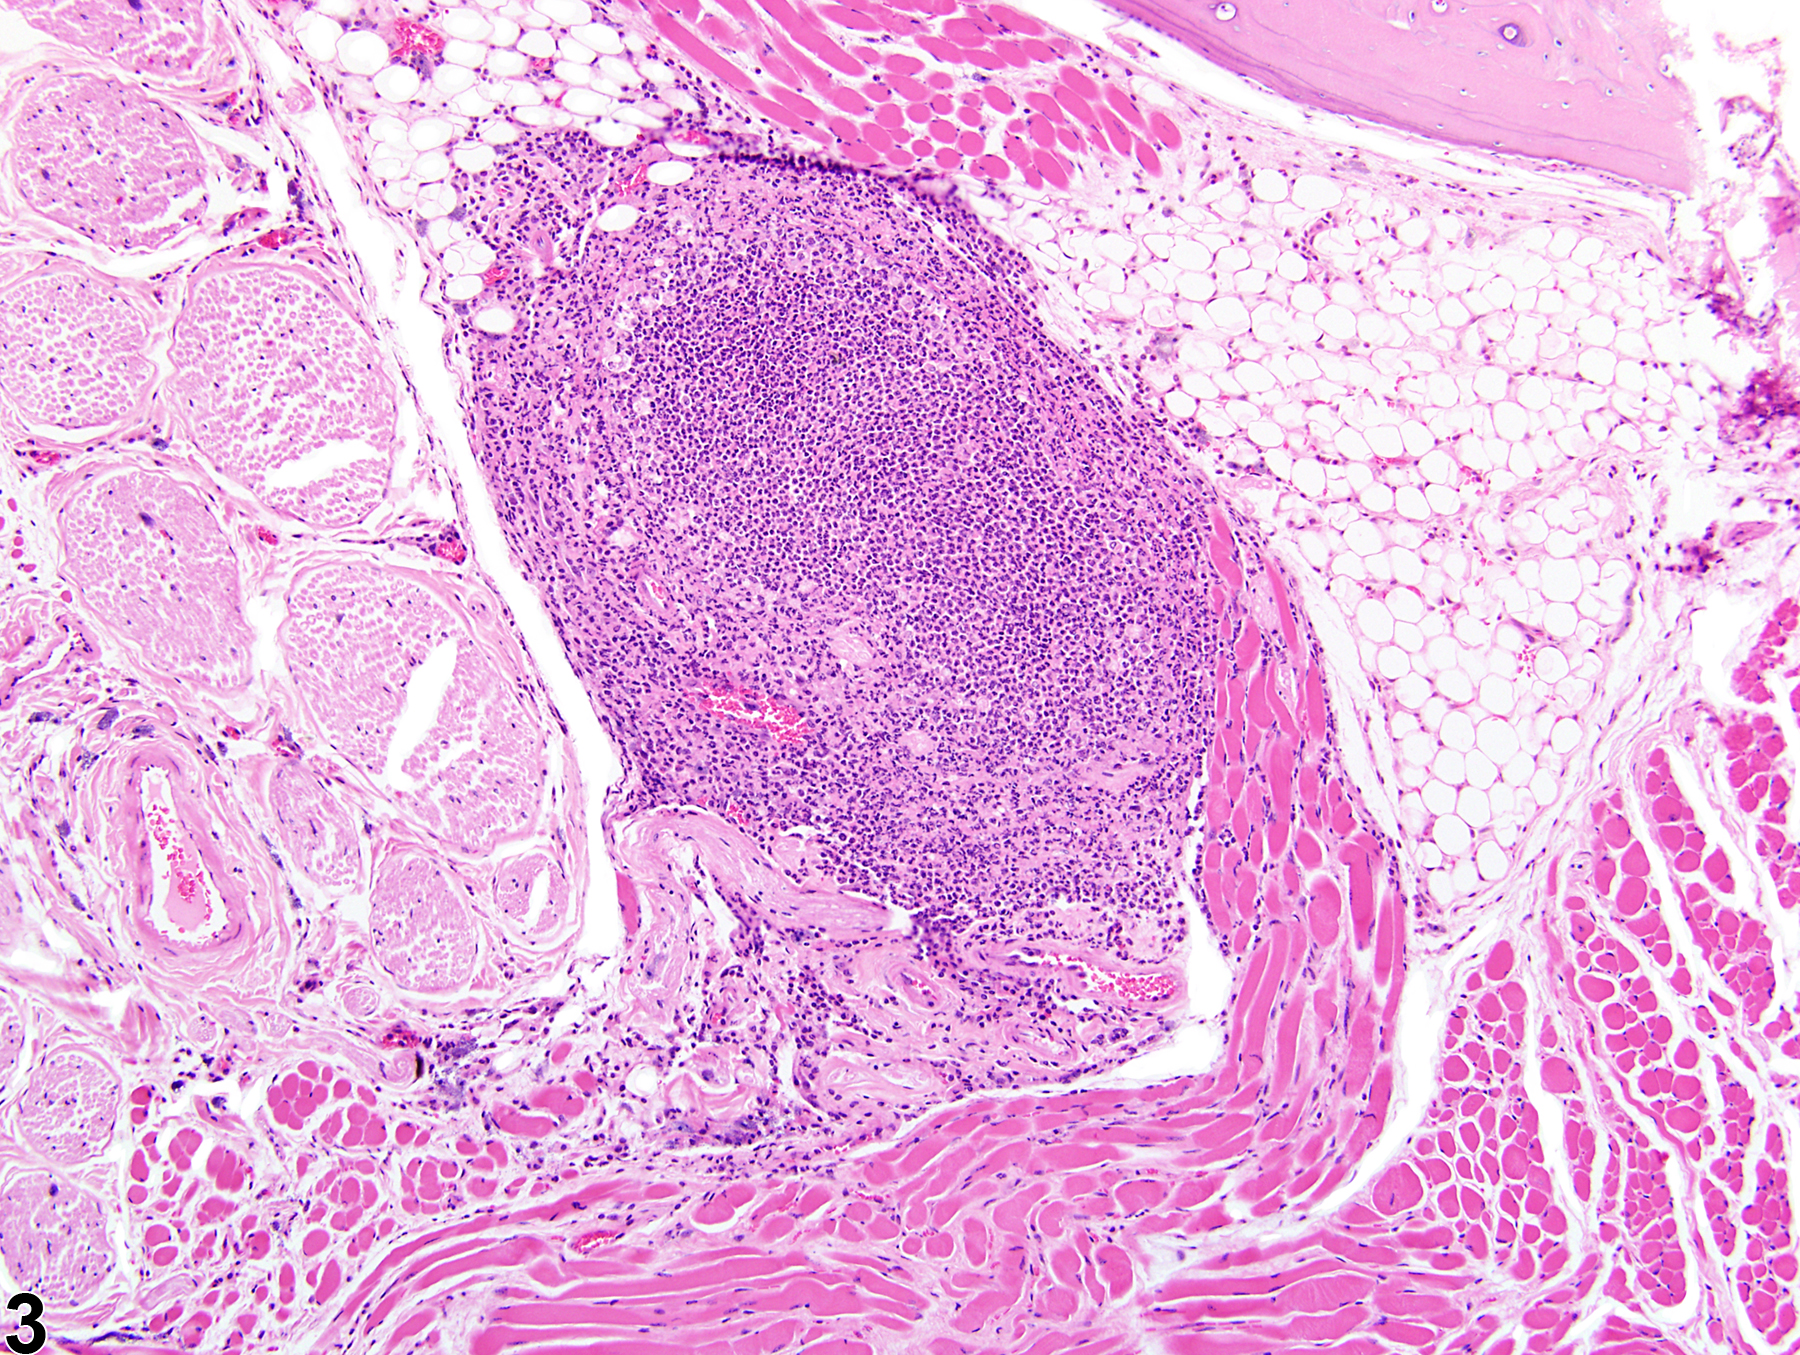 Image of inflammation in the skeletal muscle from a male B6C3F1/N mouse in a chronic study